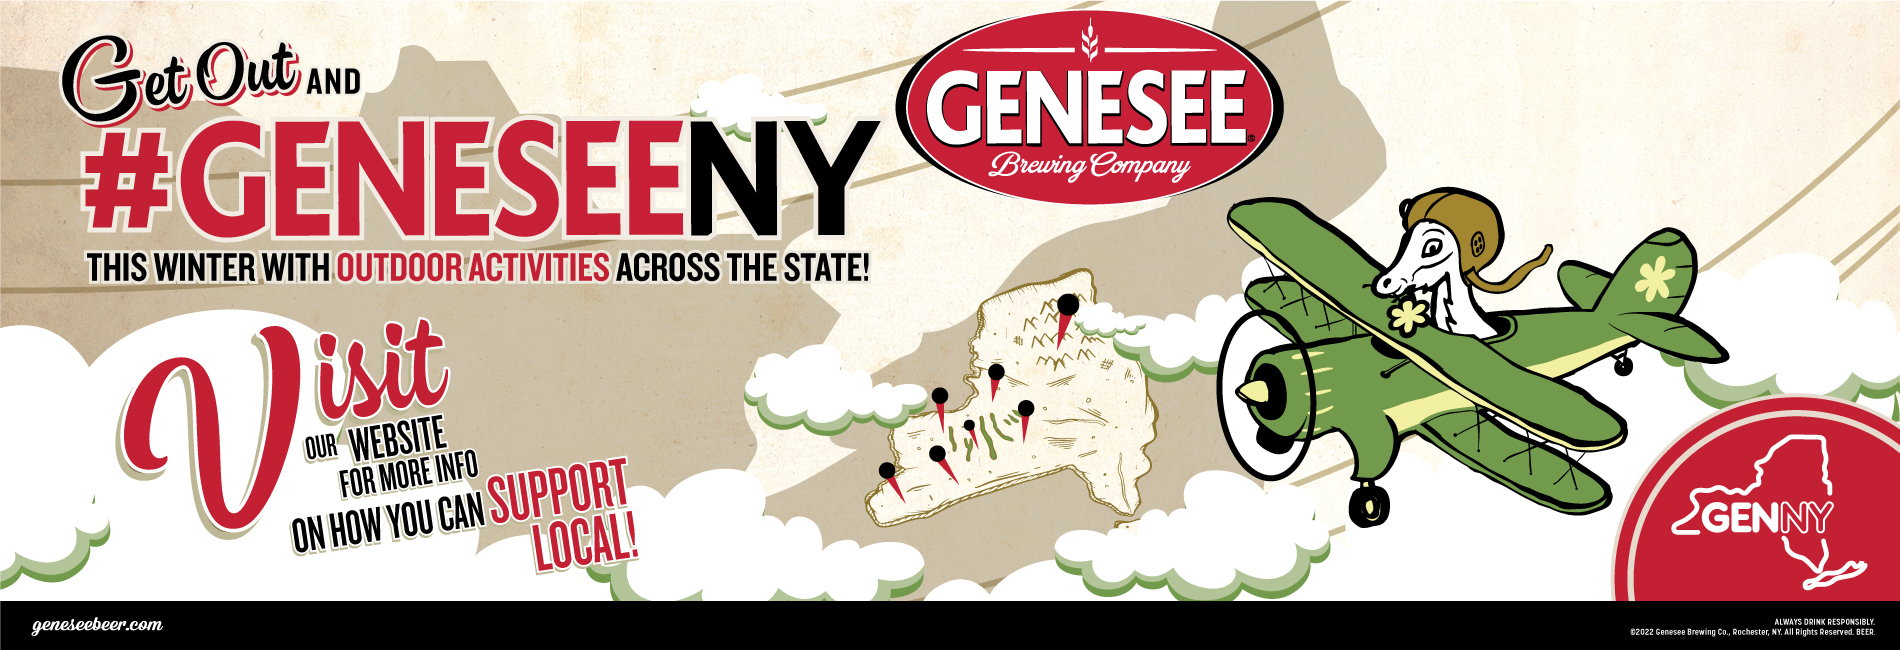 Image depicts the Spring Bock goat flying an airplane with a map of New York state in the background. Text reads- Get out and hastag GeneseeNY this winter with outdoor activities across the state! Visit our webpage for more info on how you can support local! Genesee Brewing Company.